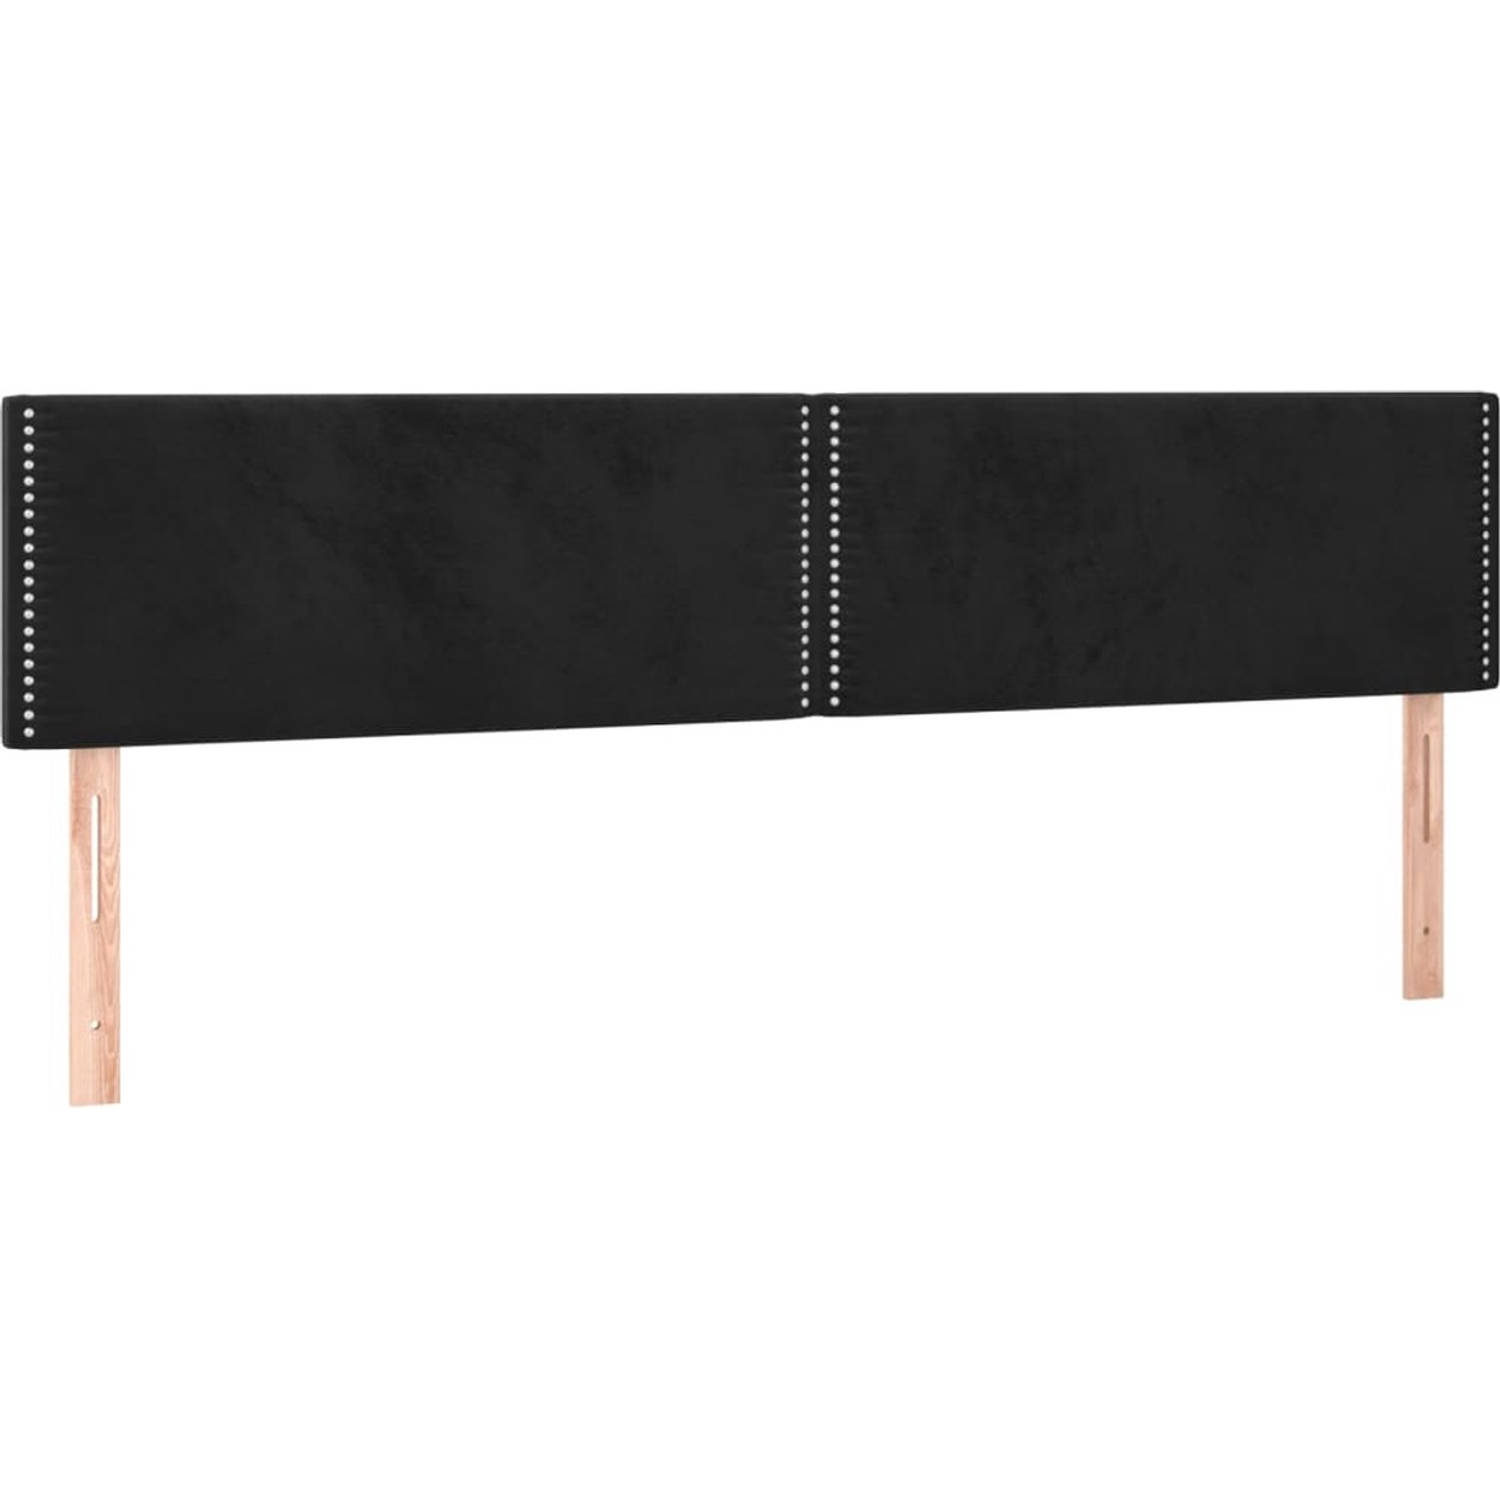 The Living Store Boxspringbed - Bed (203x180x78/88 cm) - Zacht fluweel